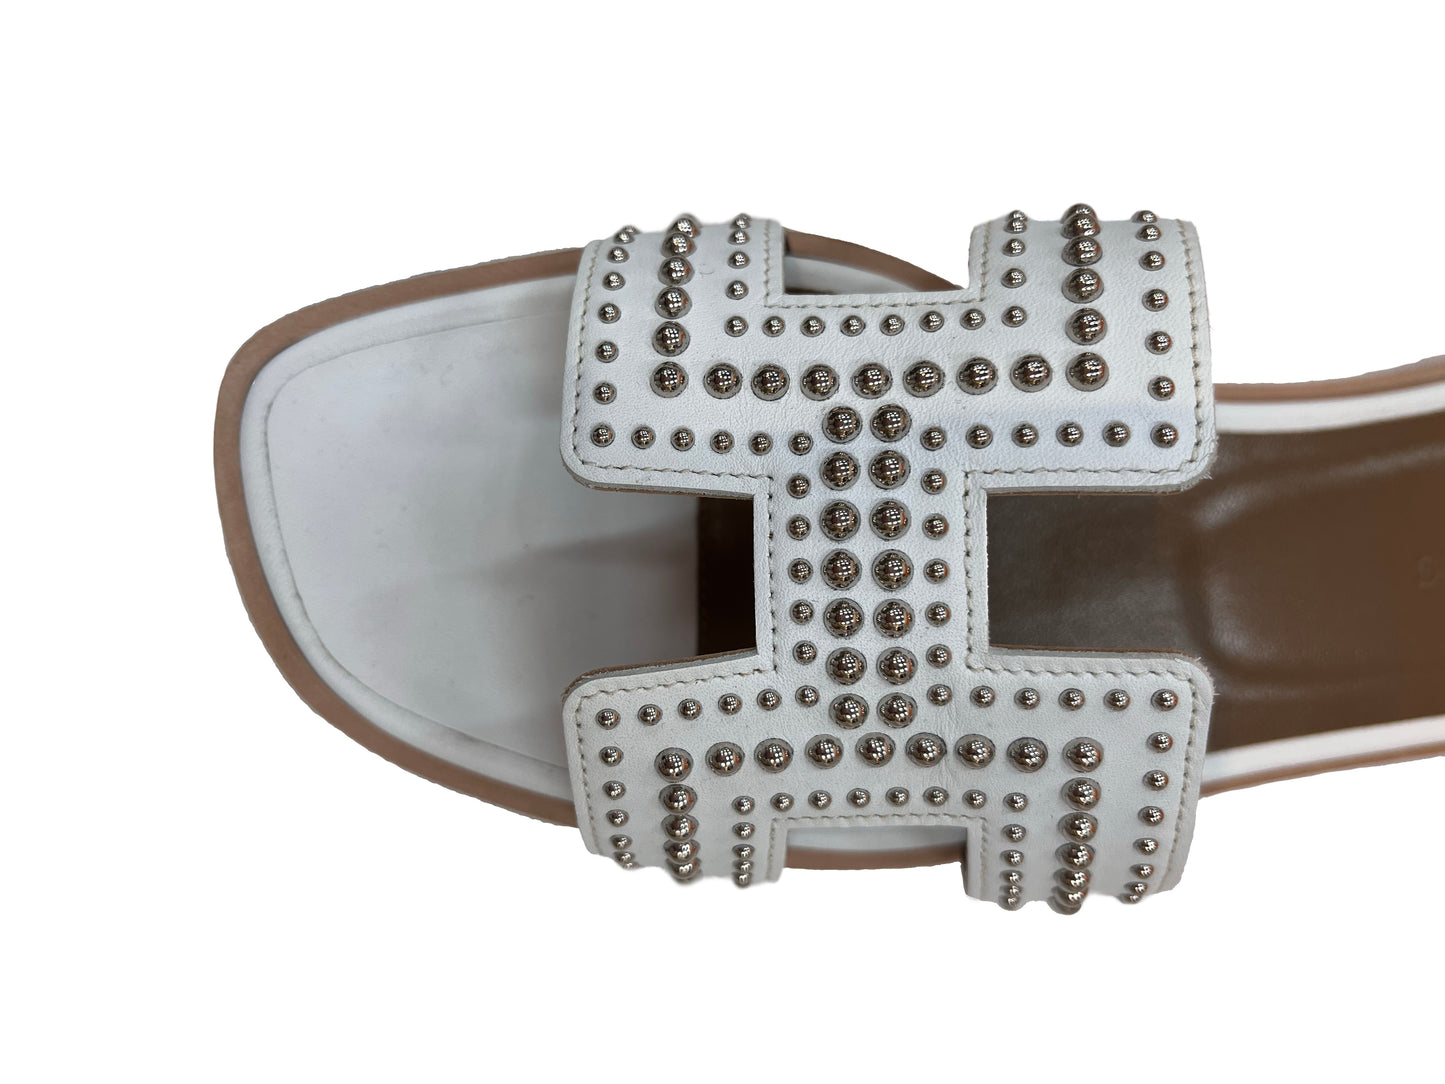 HERMES Leather Studded Tomette Oran Sandals White Size 37